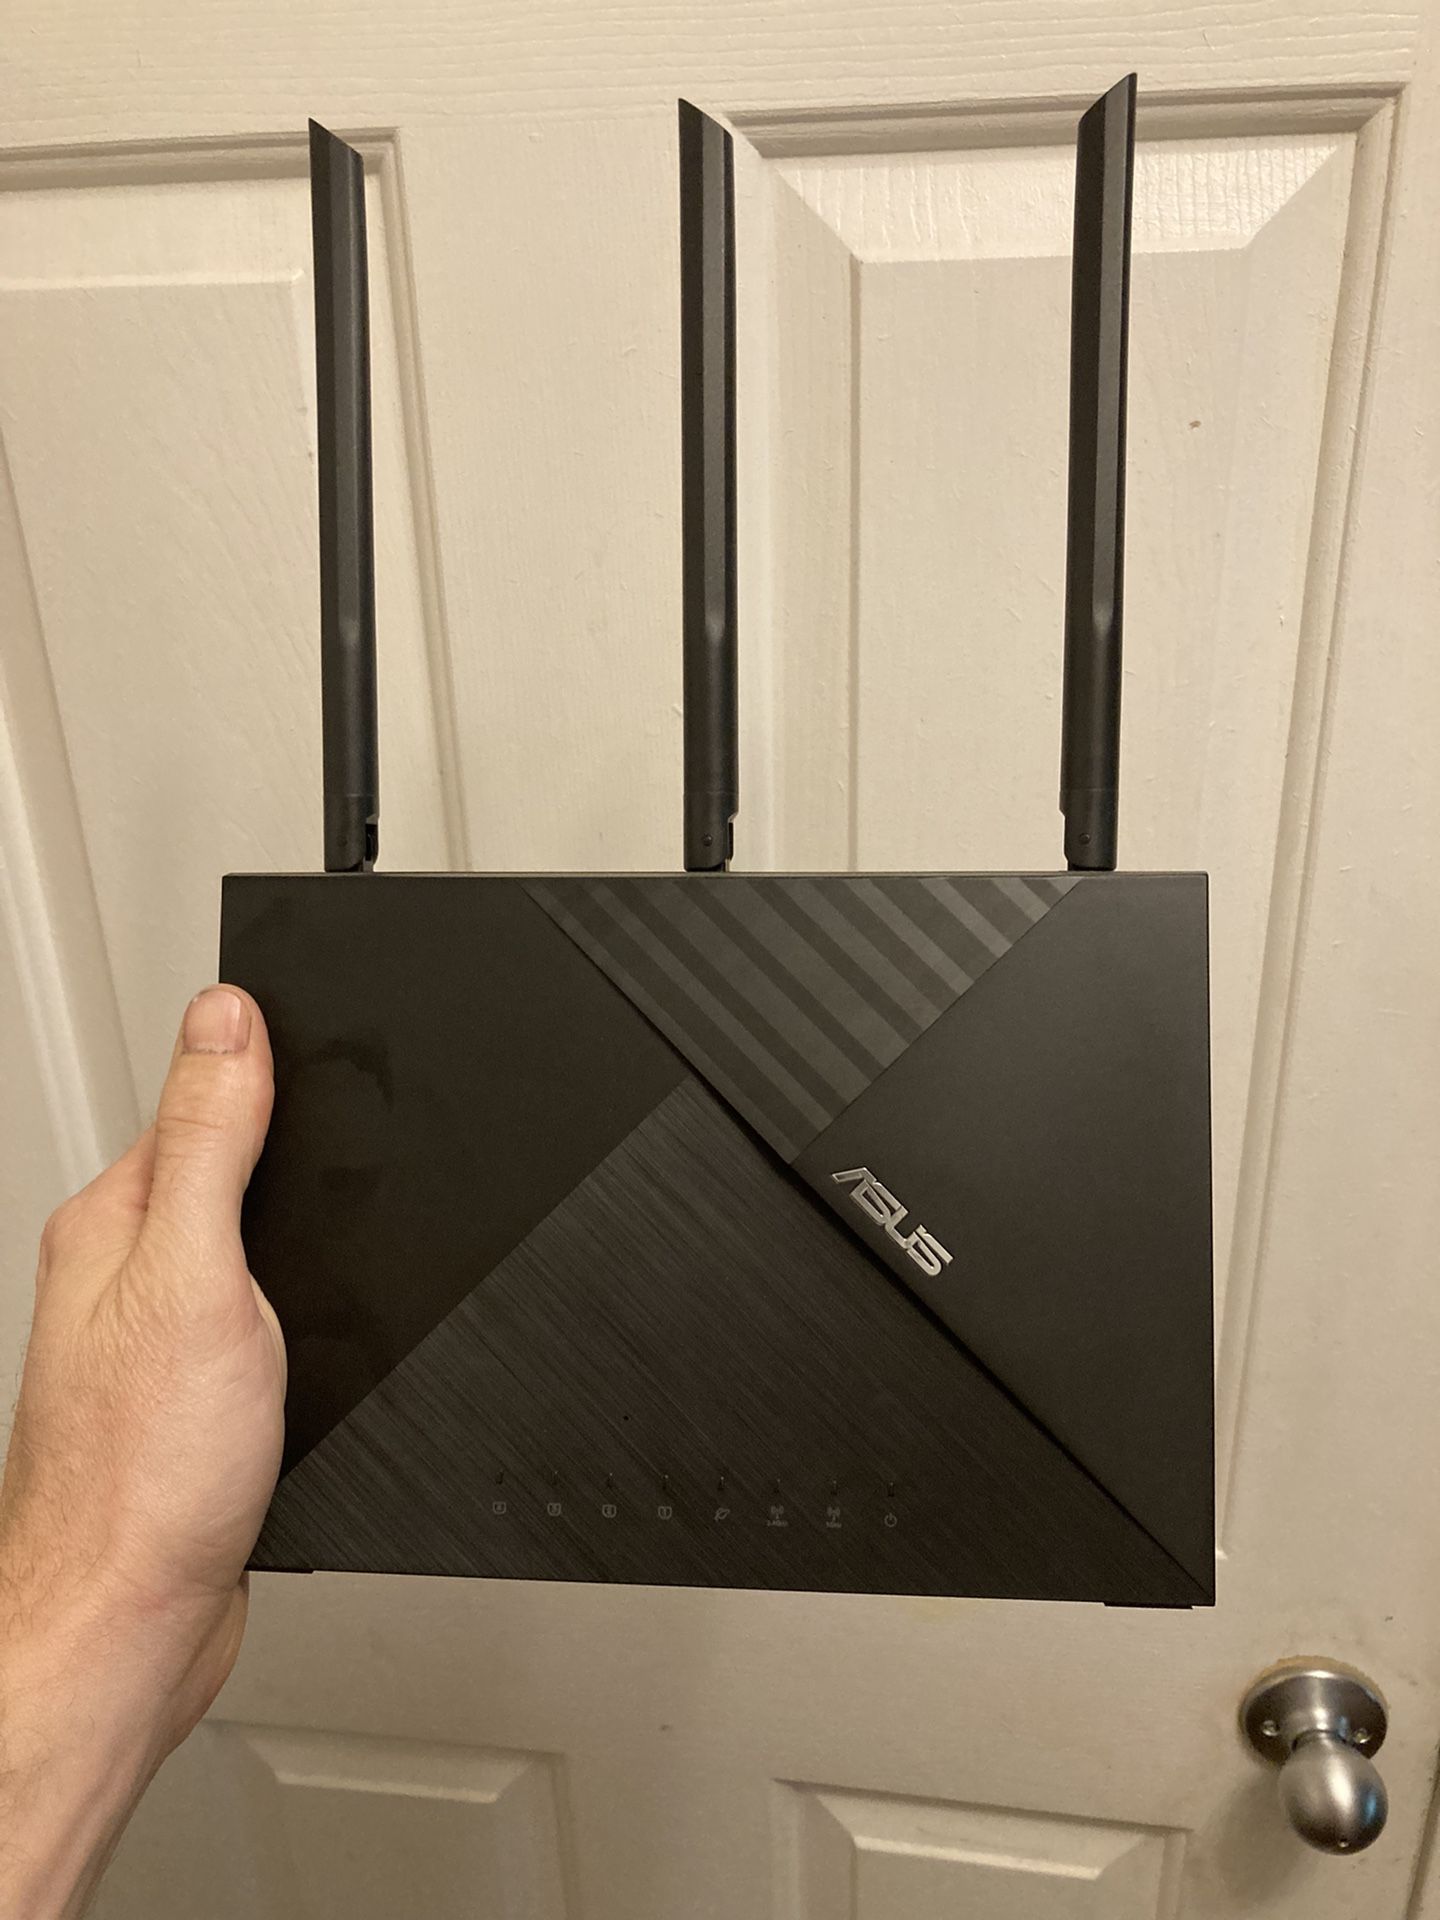 Asus Rt-ac67p Router